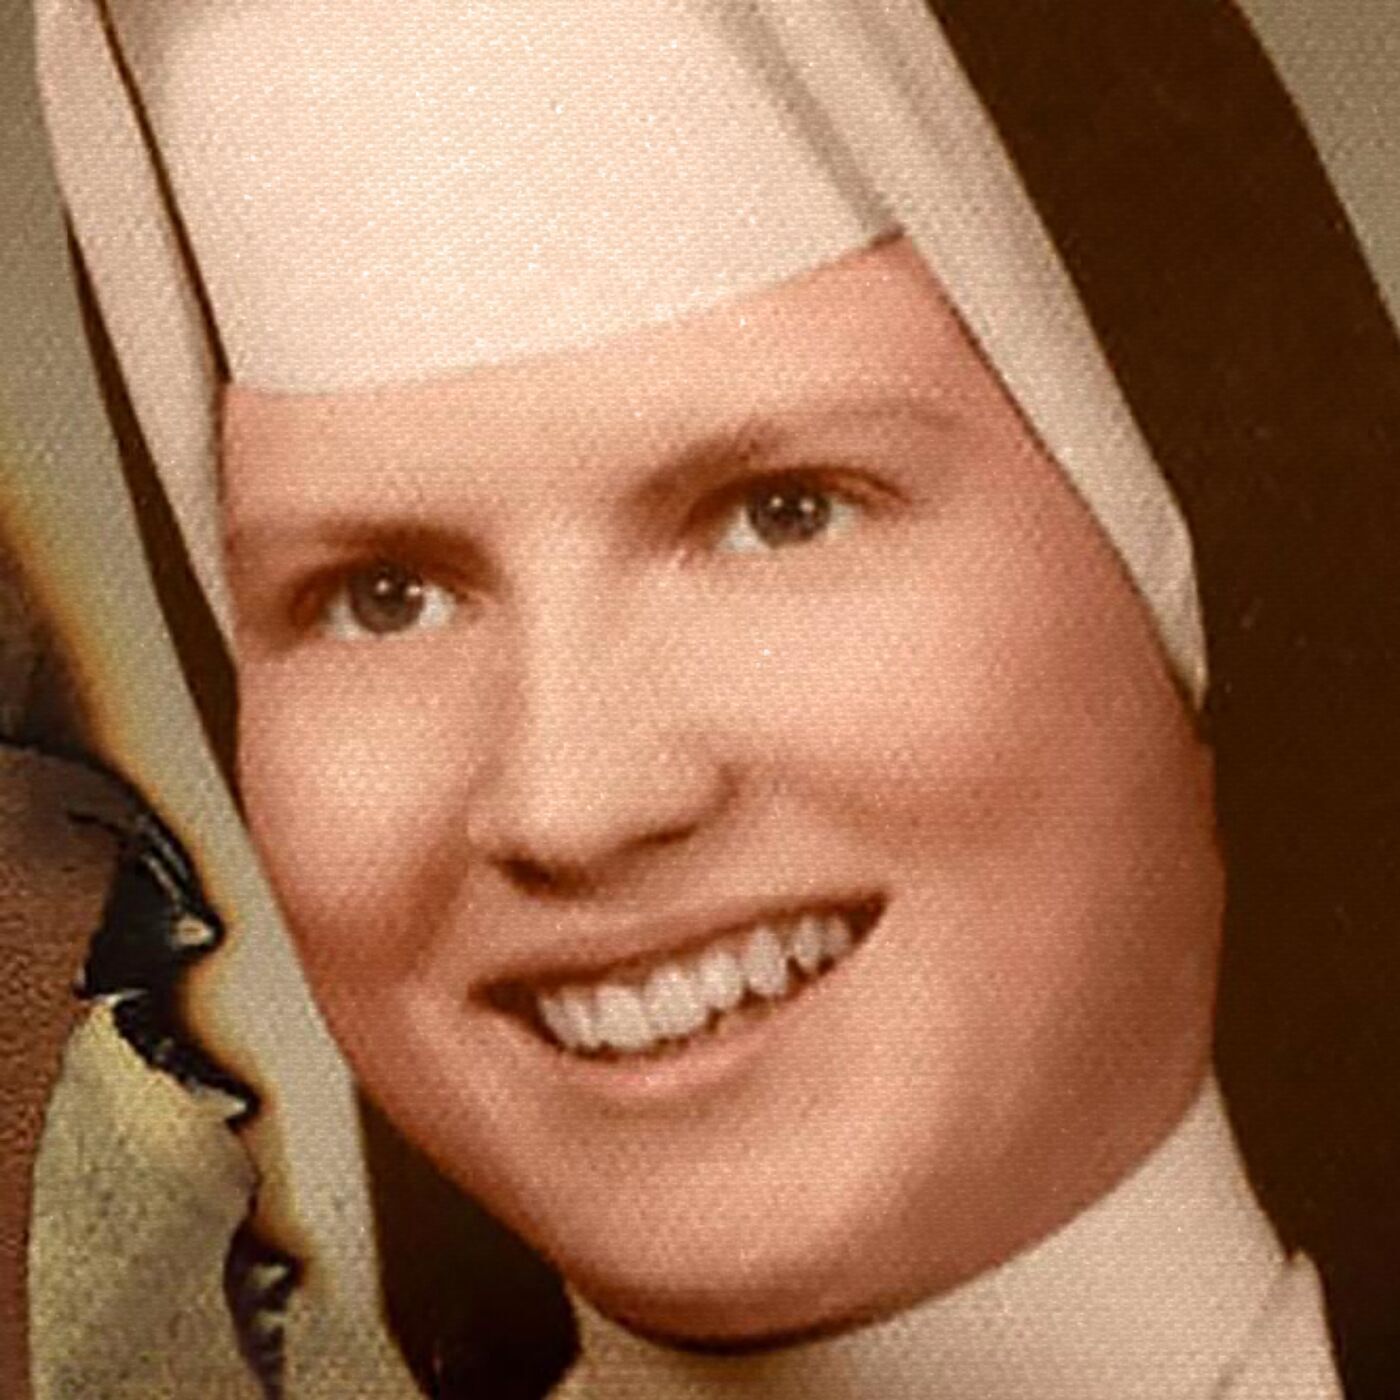 S2 Ep47: Sister Cathy, The Redacted Truths – MKUltra’s Children